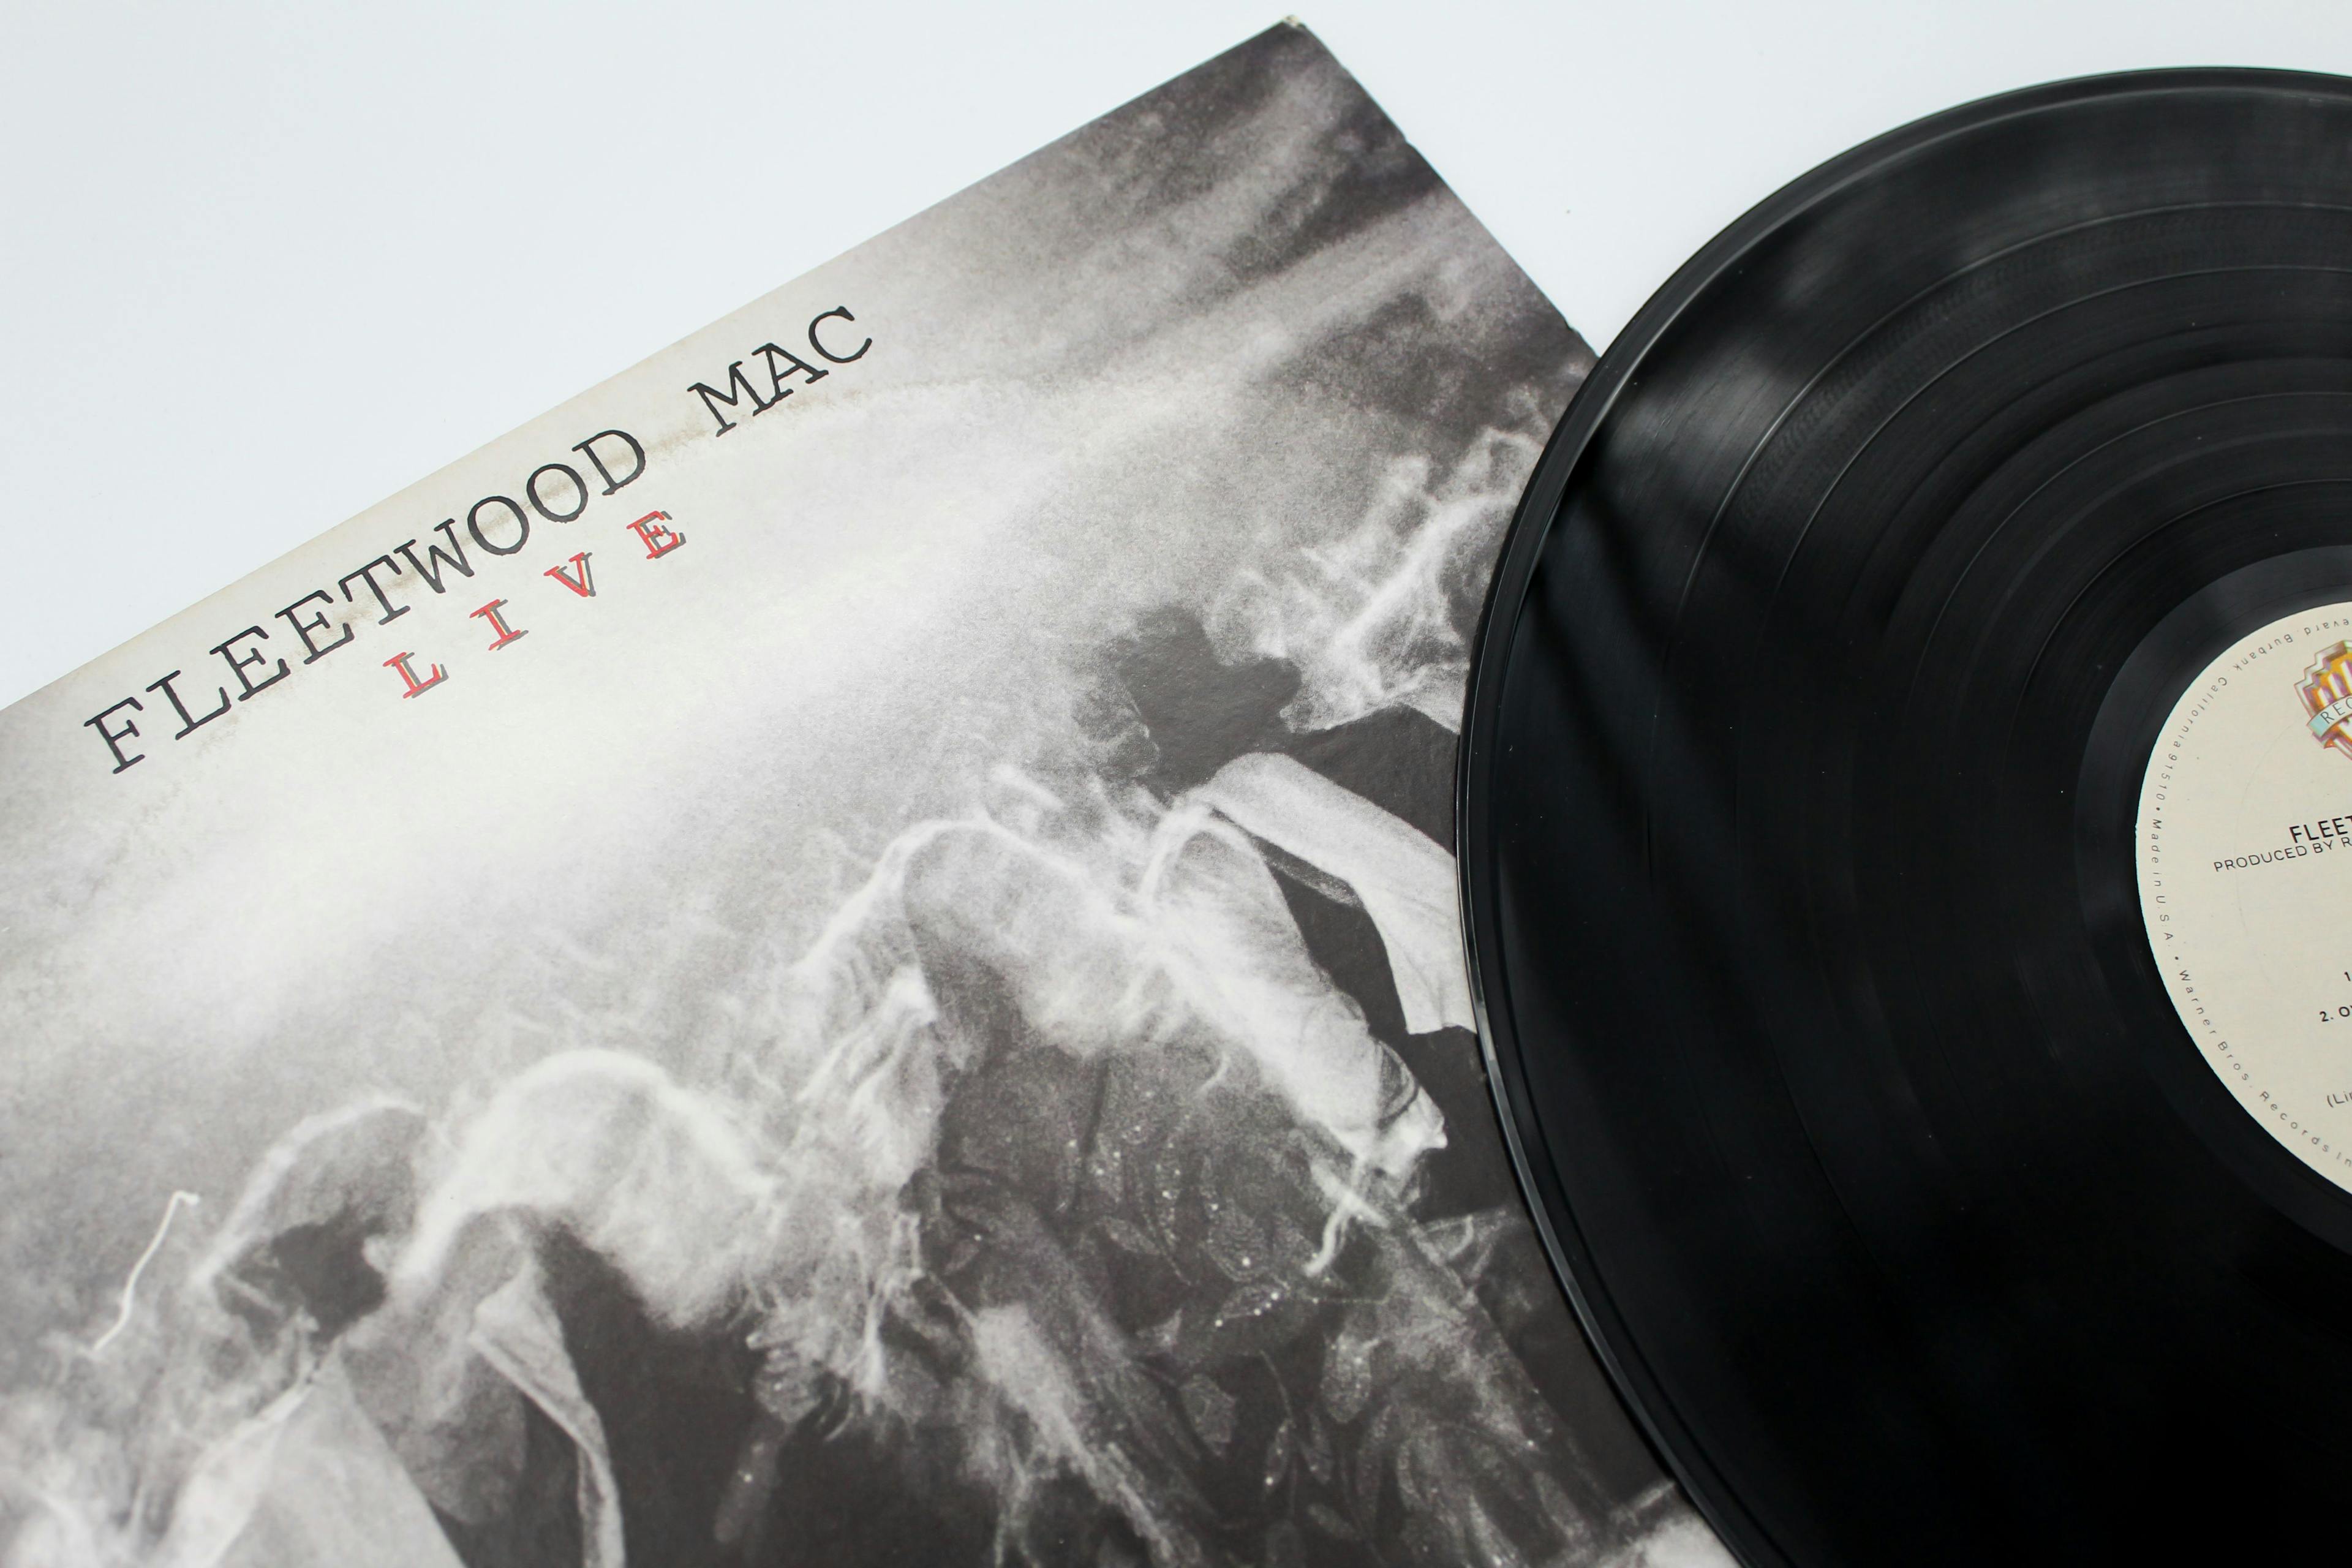 Rock and soft rock band, Fleetwood Mac music album on vinyl record LP disc. Titled: Live Fleetwood Mac album cover on vinyl record LP. Taken November 30, 2022 in Miami, FL. | Image Credit: © Blue - © stock.adobe.com